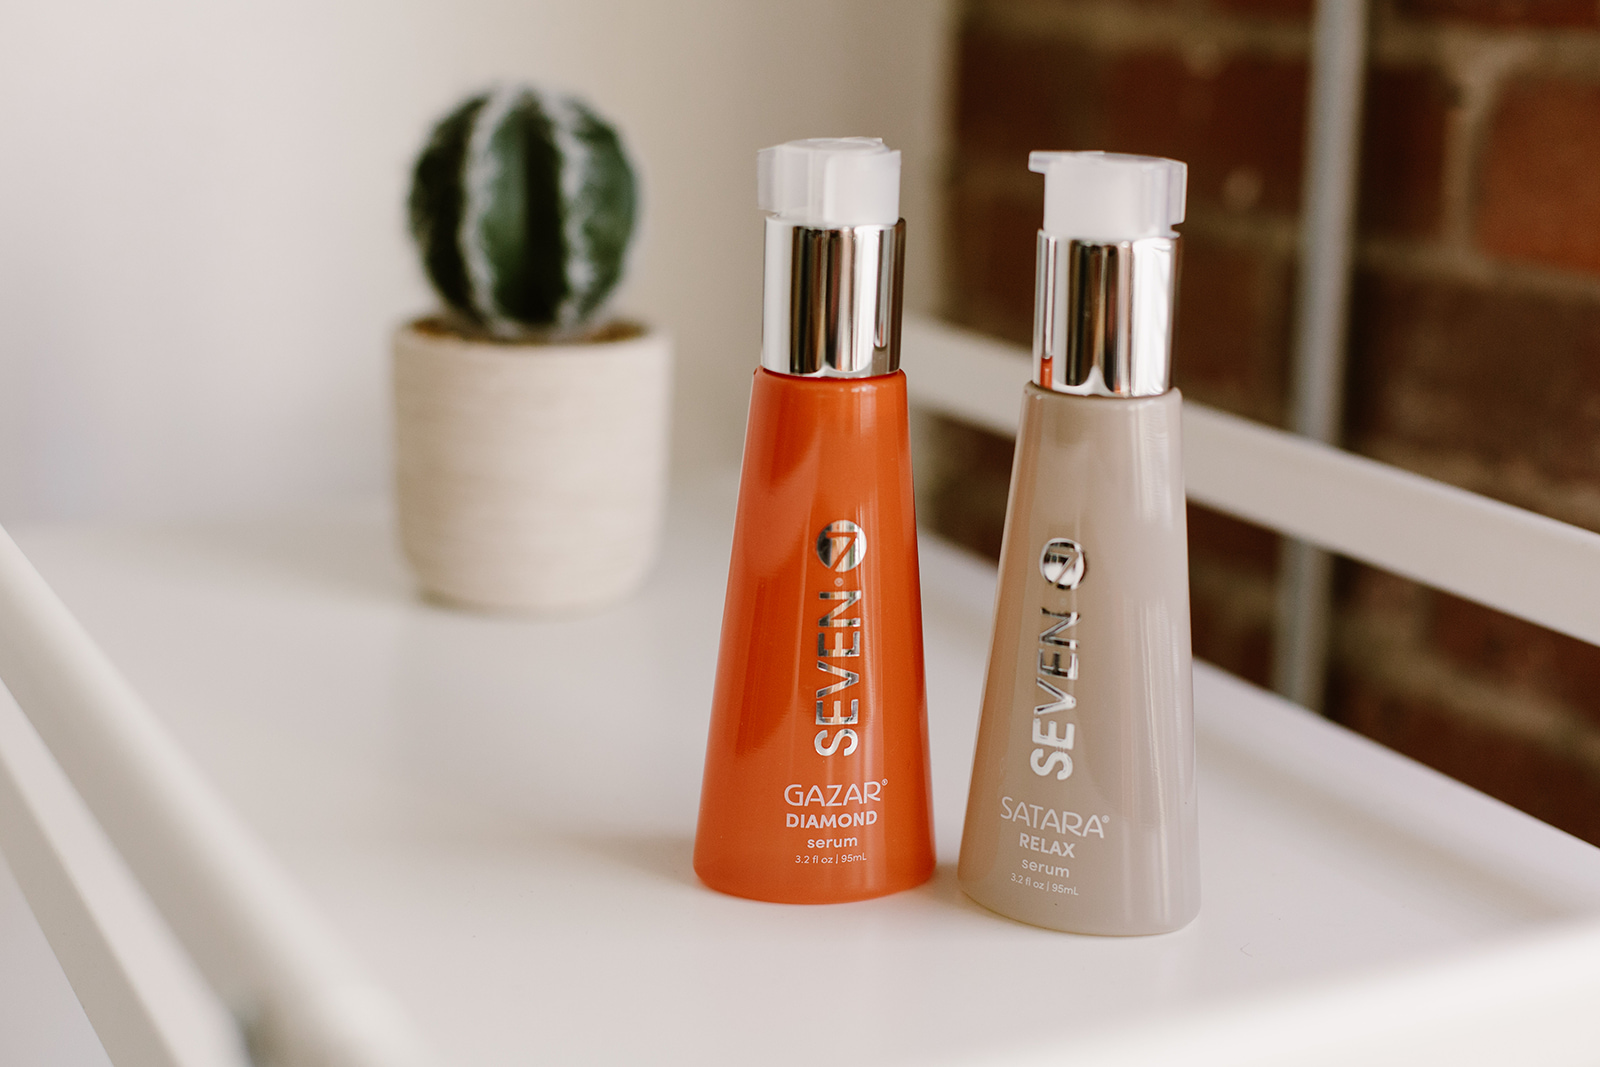 Shampoos, conditioners, and sprays that enhance your hair's natural radiance and produce a high-gloss finish.